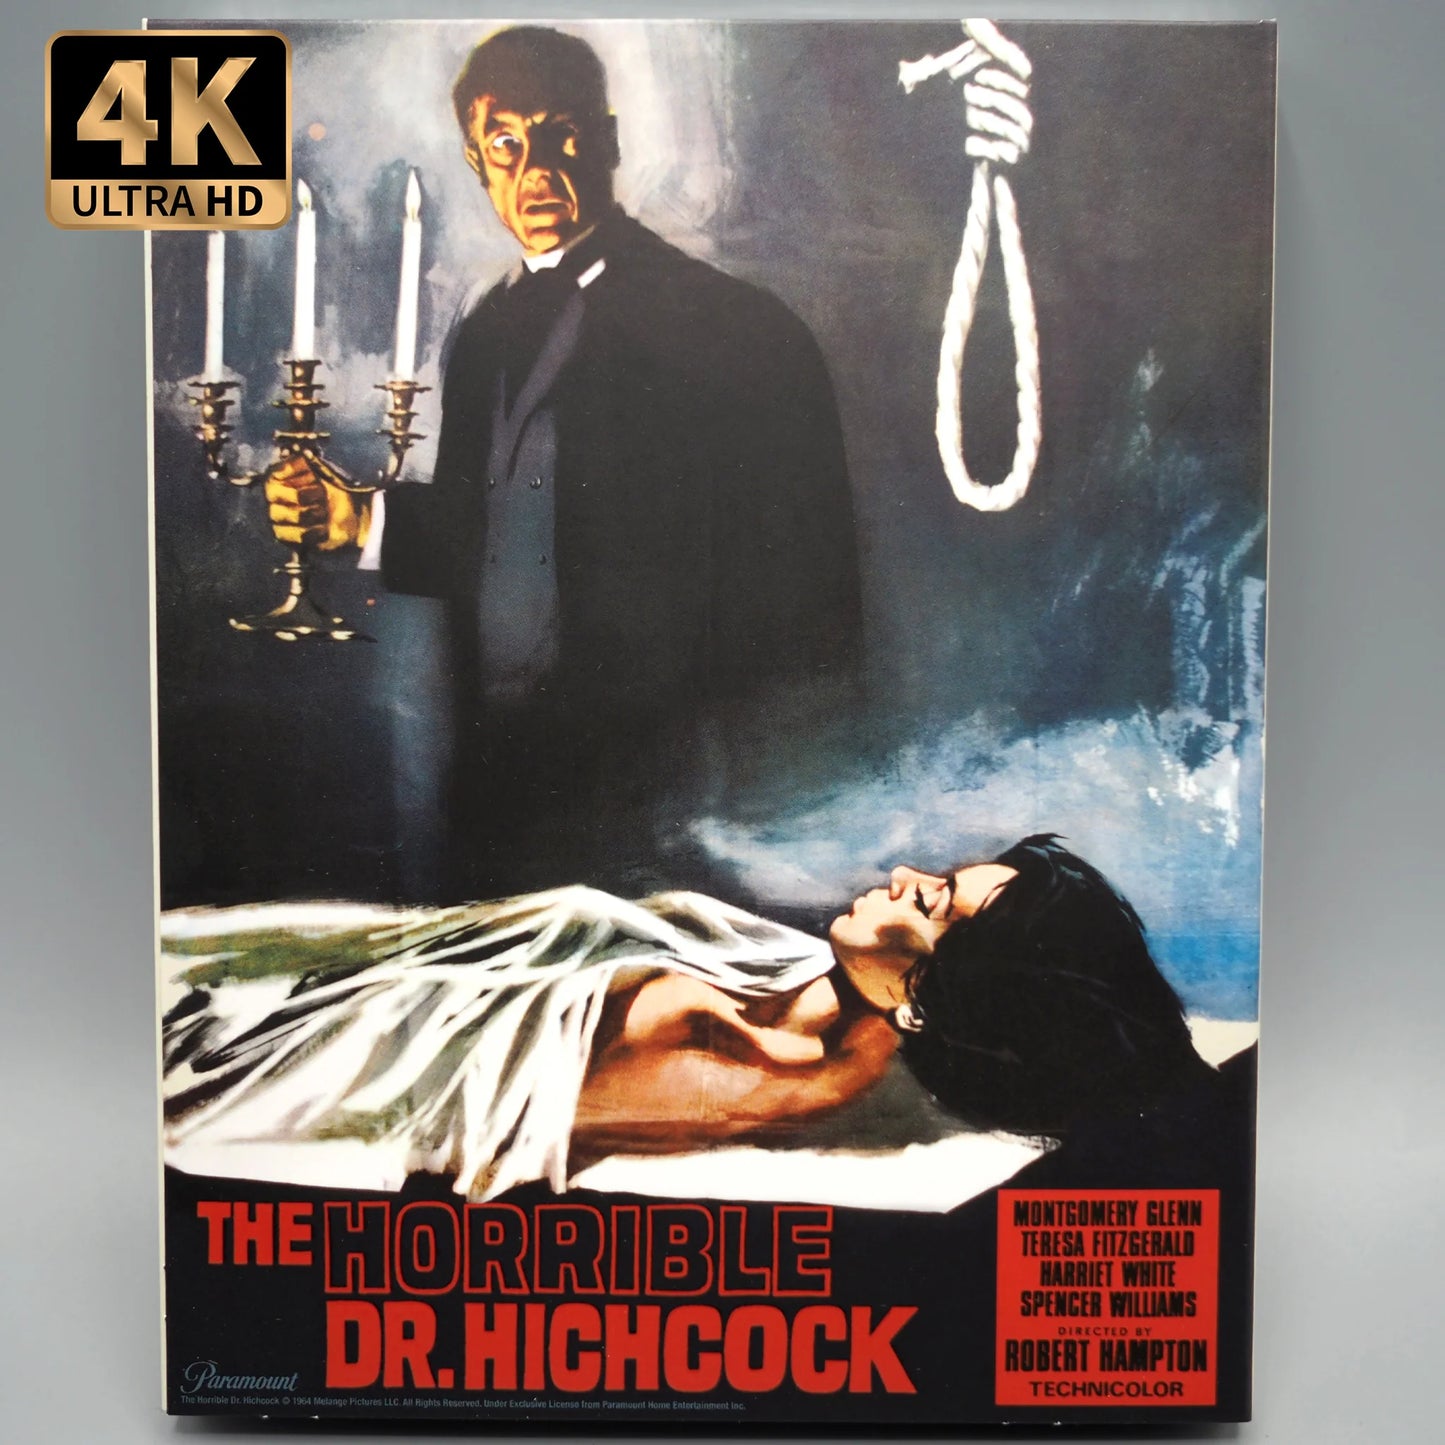 The Horrible Dr. Hichcock [4K UHD] [US]